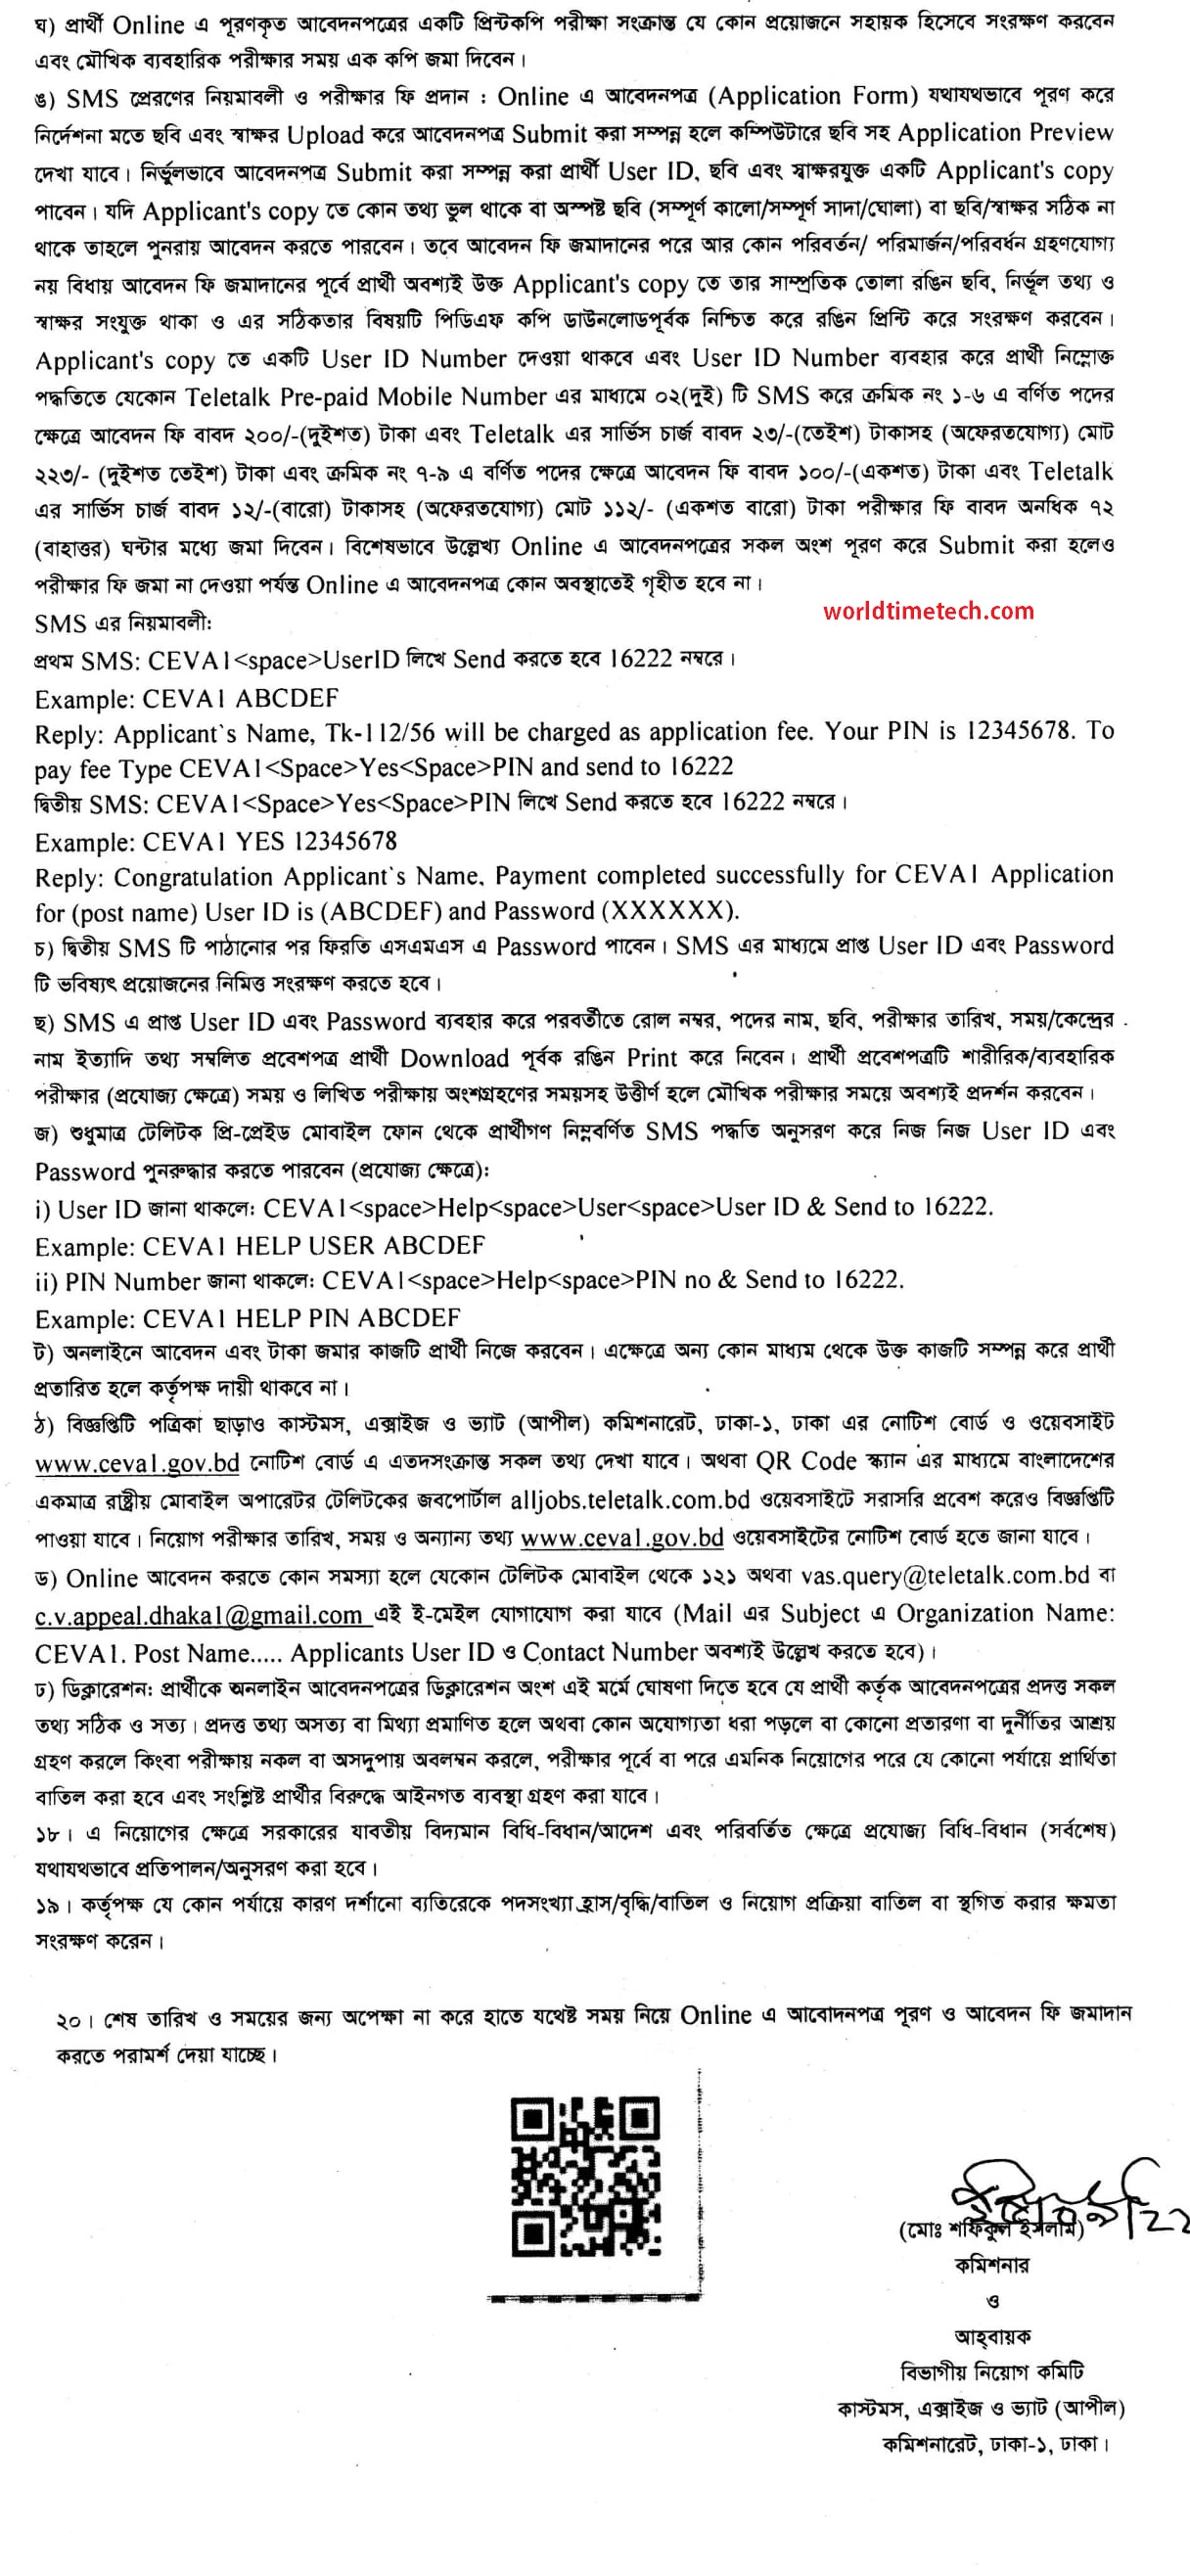 govt-customs-excise-and-vat-appeals-commissionerate-dhaka-job-circular-2022-1